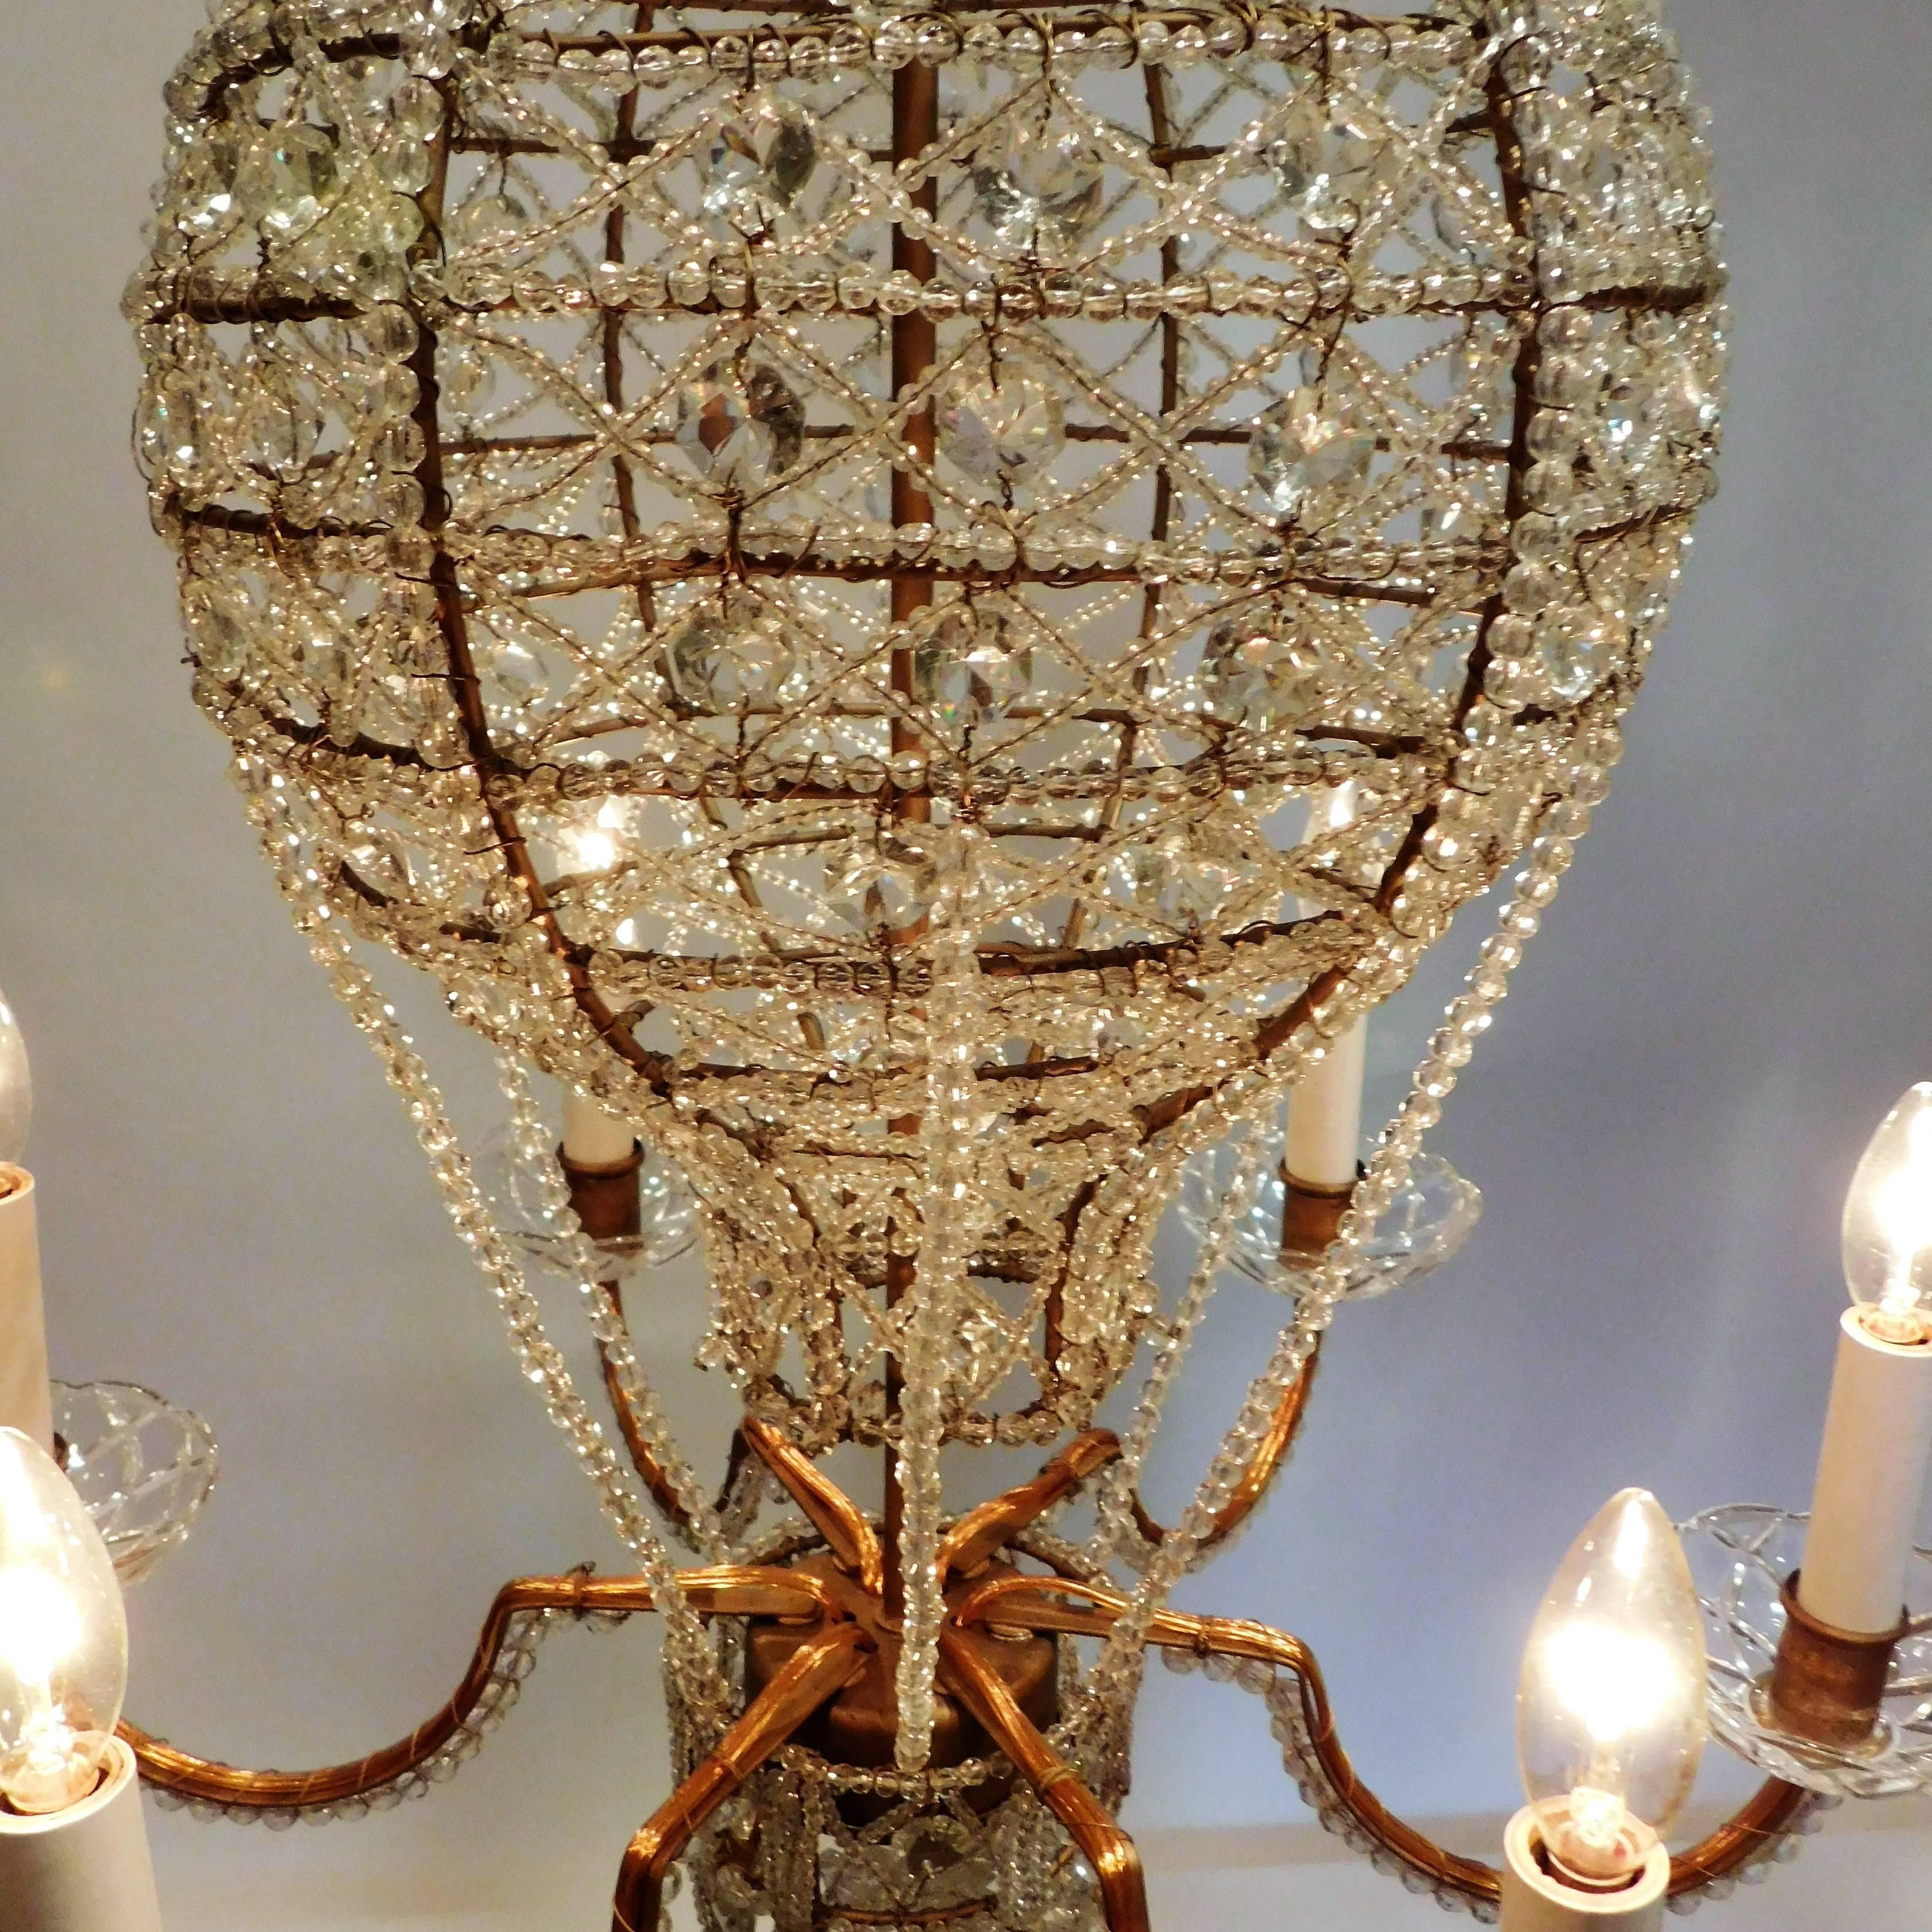 20th Century Mid-Century Italian Chandelier in the Form of a Hot Air Balloon